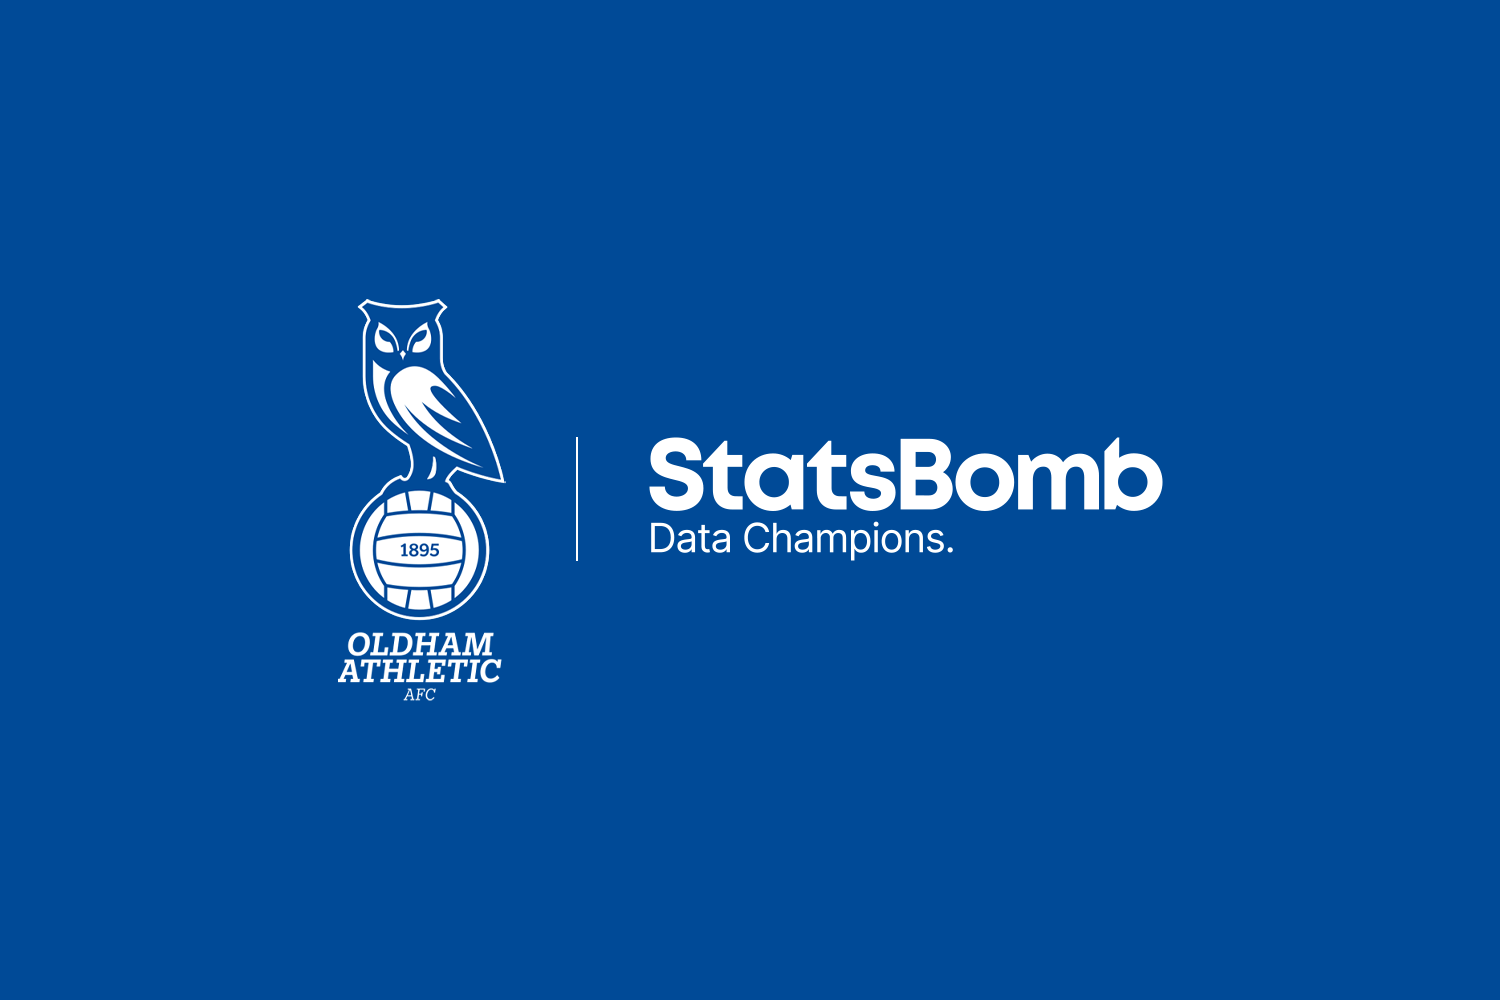 StatsBomb Begin Growth In The National League With Oldham Athletic FC Partnership